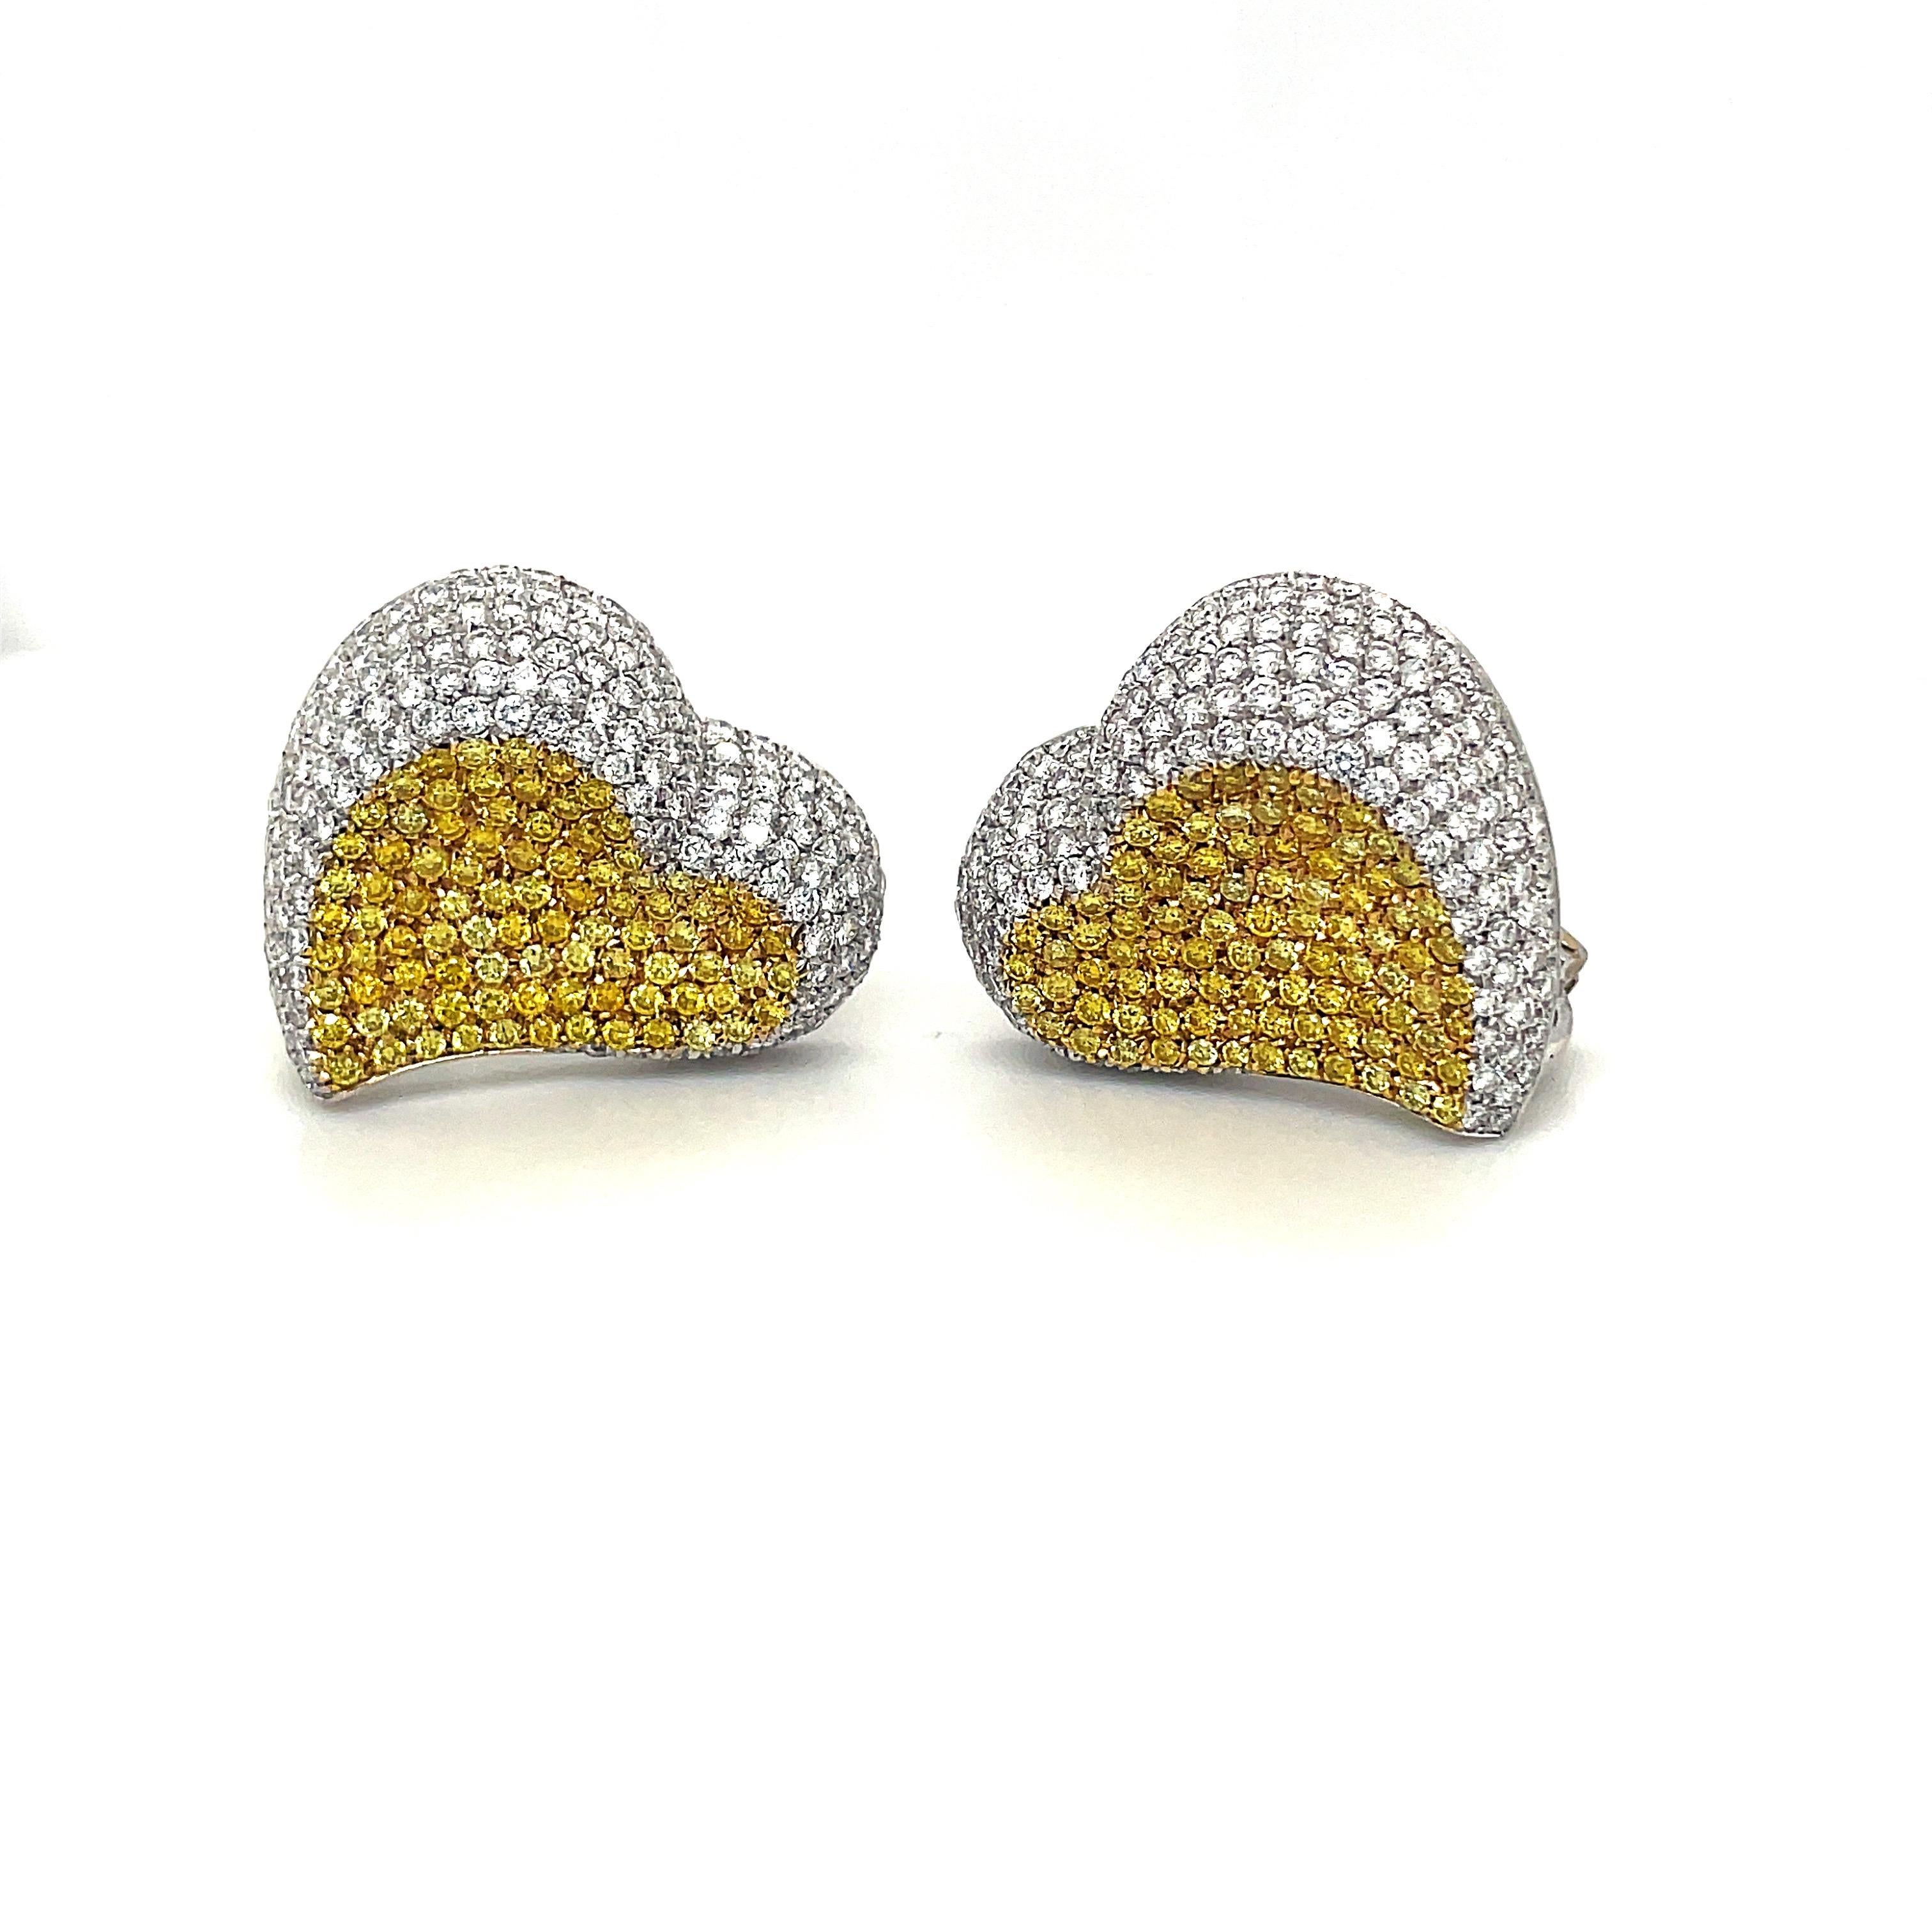 Cellini 6.16ct. Yellow and White Diamond Heart Earrings in 18kt Gold In New Condition For Sale In New York, NY